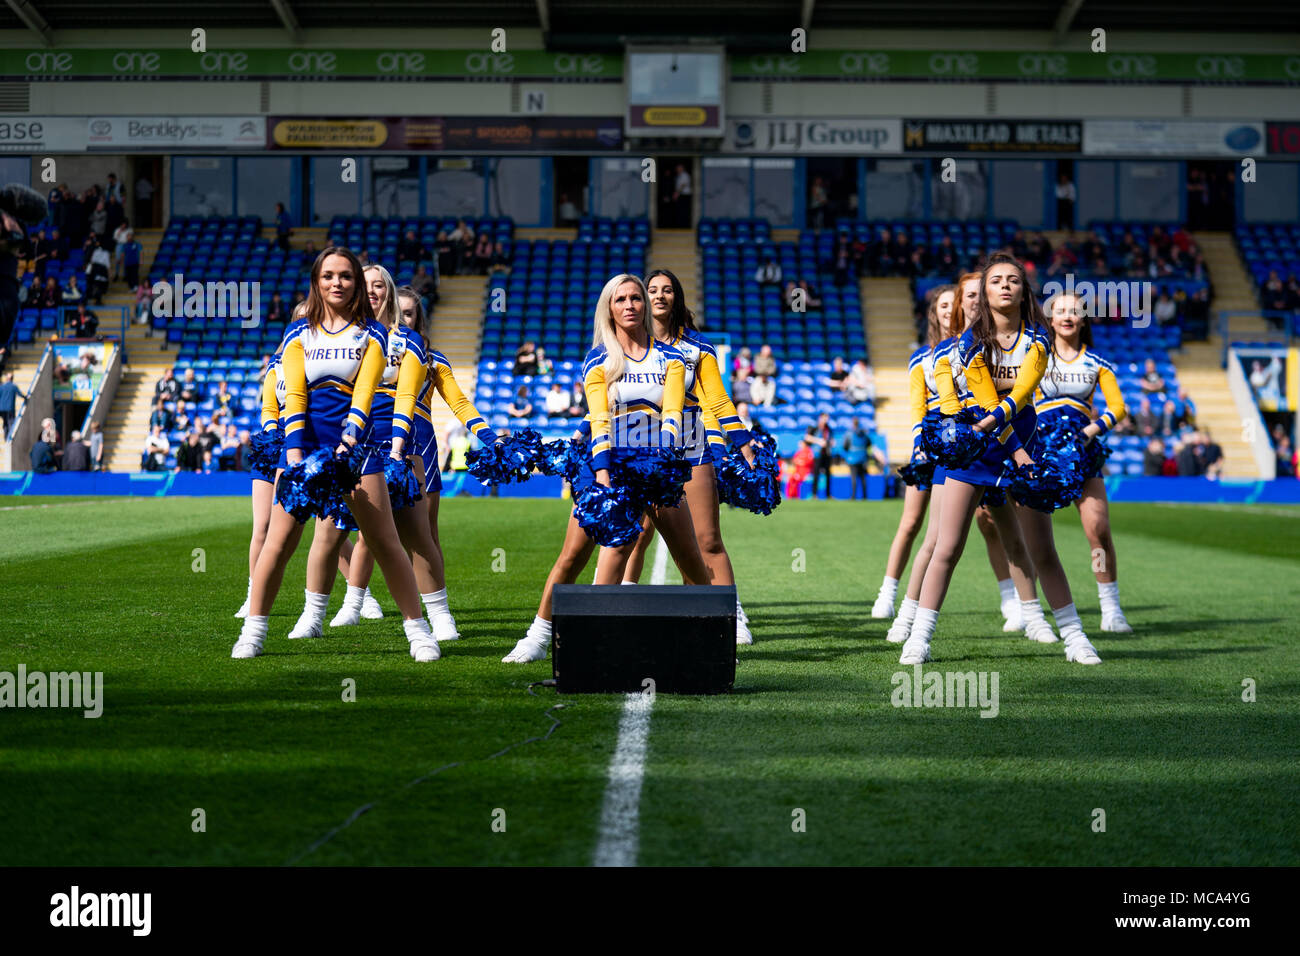 Cheer leaders before kick off  14th April 2018 , The Halliwell Jones Stadium Mike Gregory Way, Warrington, WA2 7NE, England;  Betfred Super League rugby, Round 11, Warrington Wolves v Hull Kingston Rovers Stock Photo